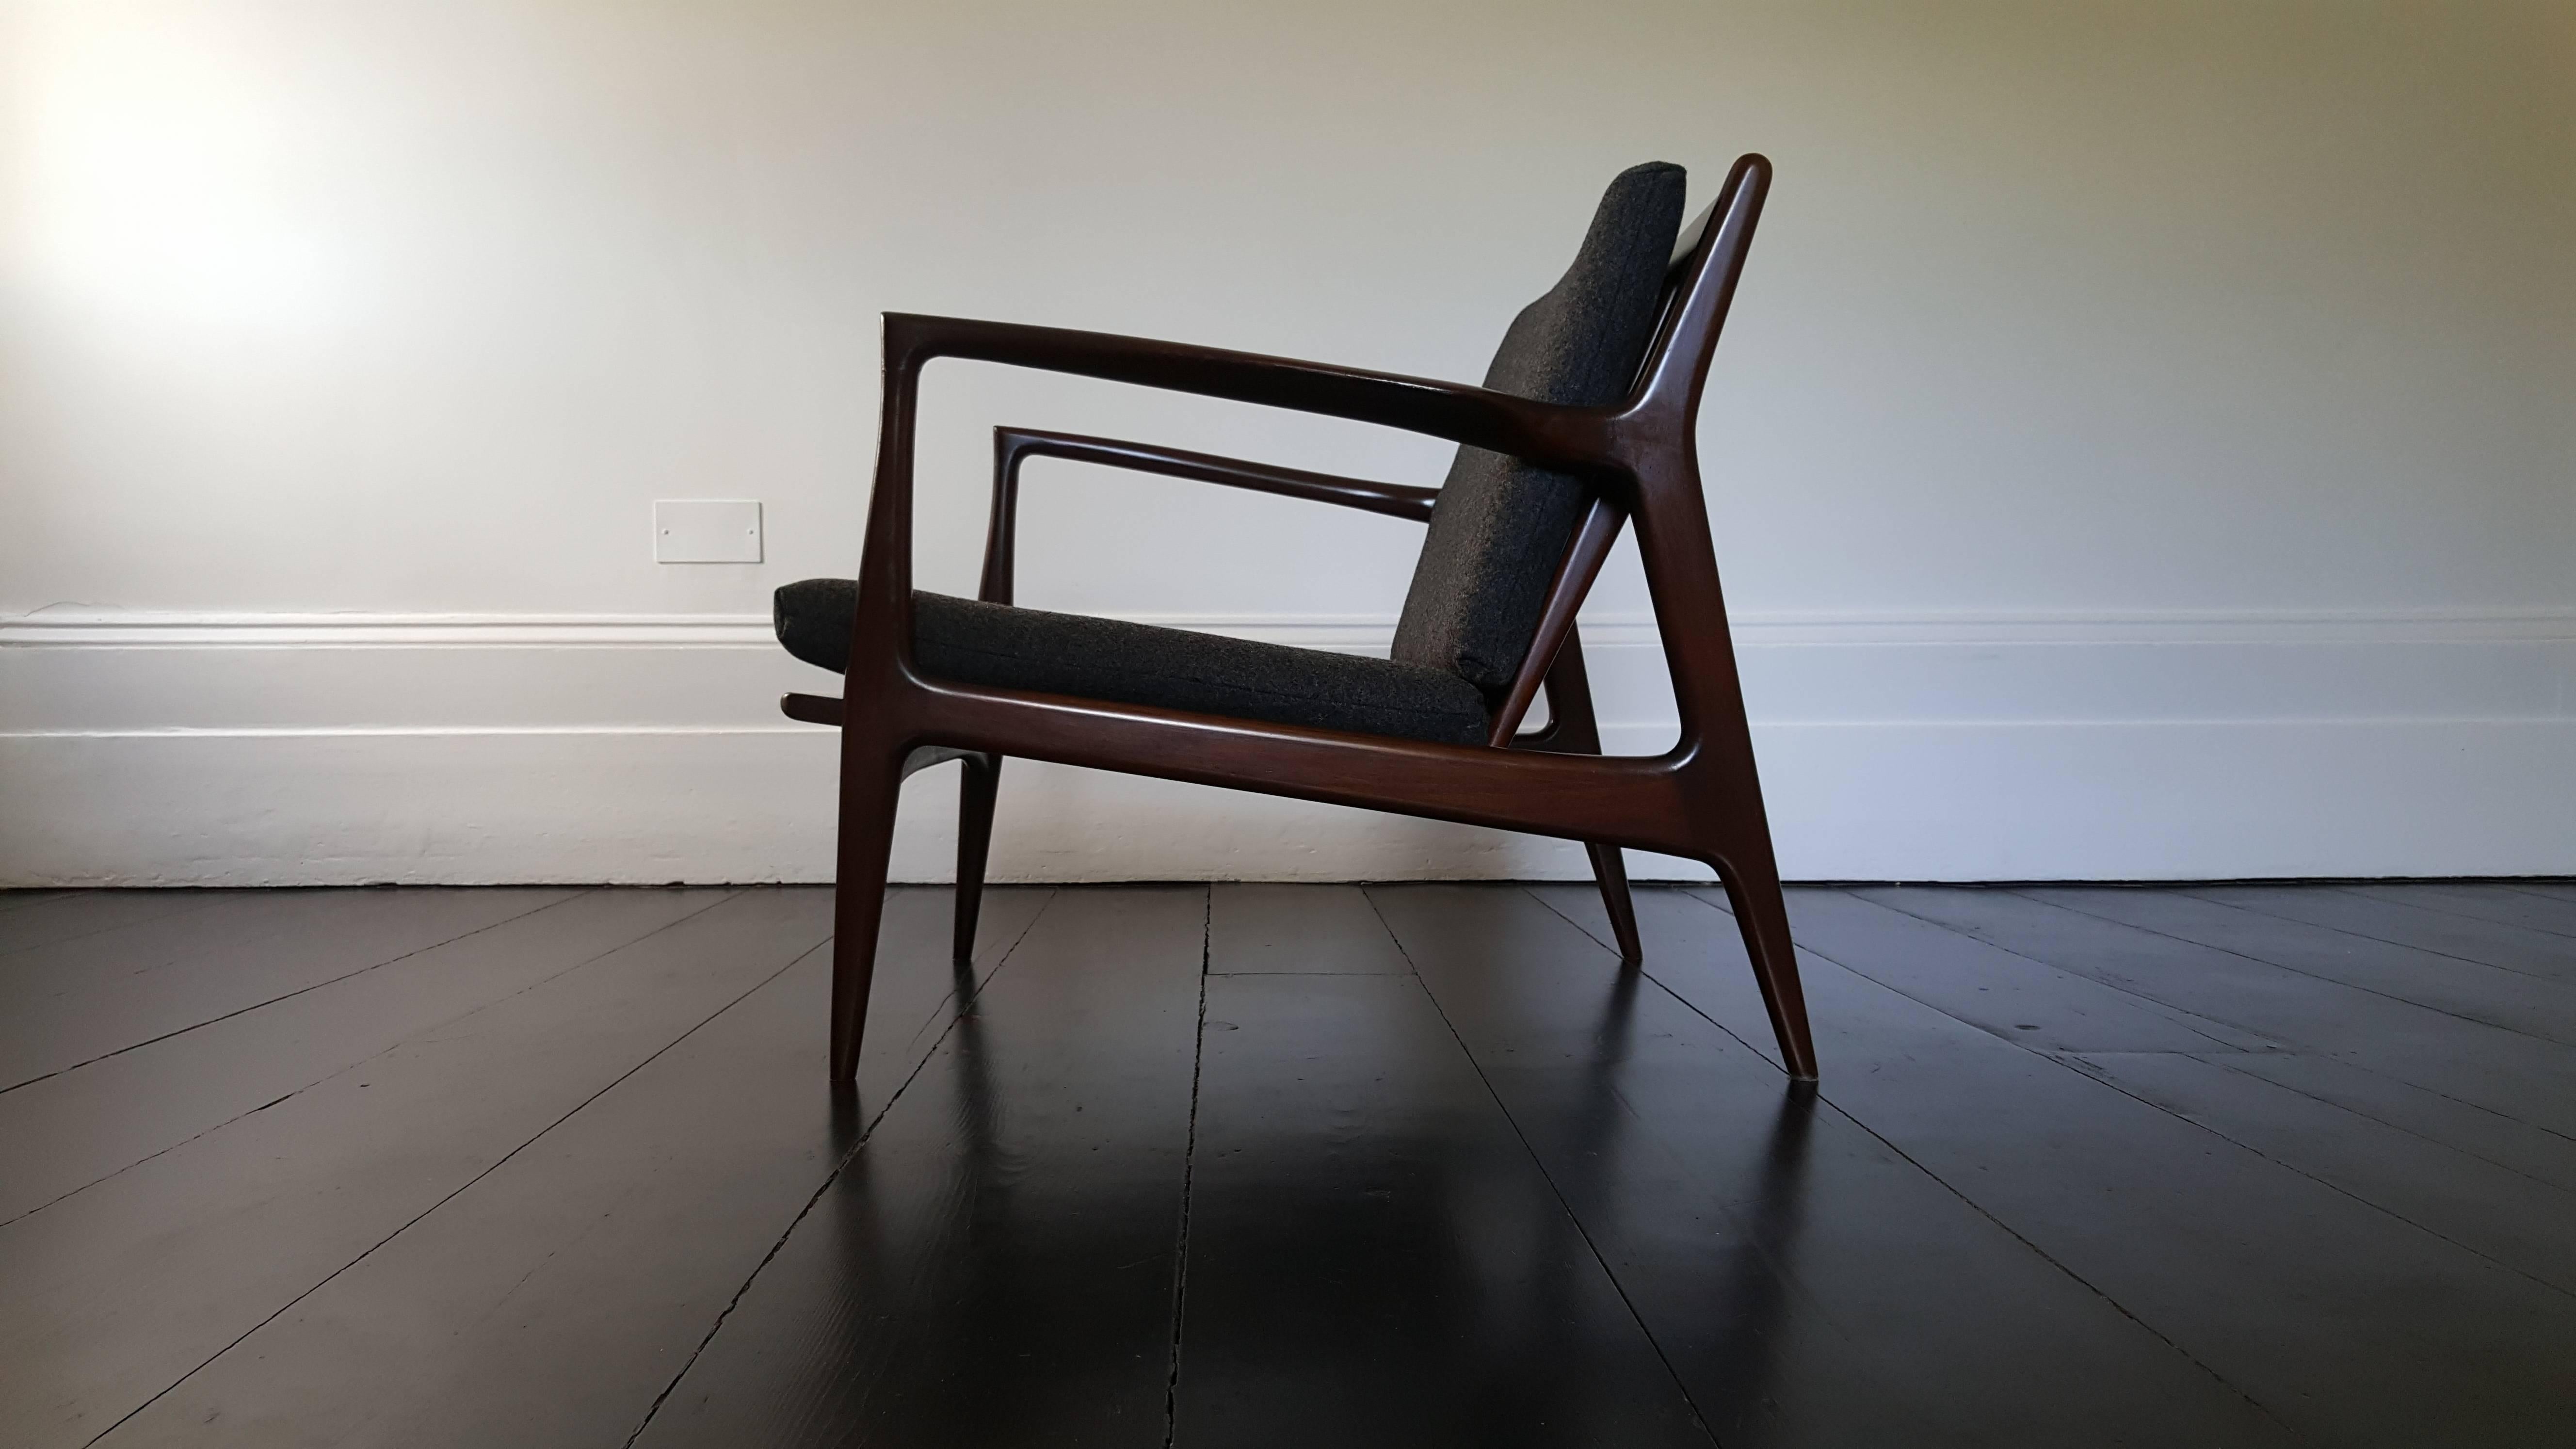 Stunning vintage Mid-Century Ib Kofod-Larsen armchair in stained Beech with new dark grey wool. Manufactured by Selig.

Ib Kofod-Larsen was an acclaimed Danish furniture designer. He graduated from the Royal Danish Academy of Fine arts and went on